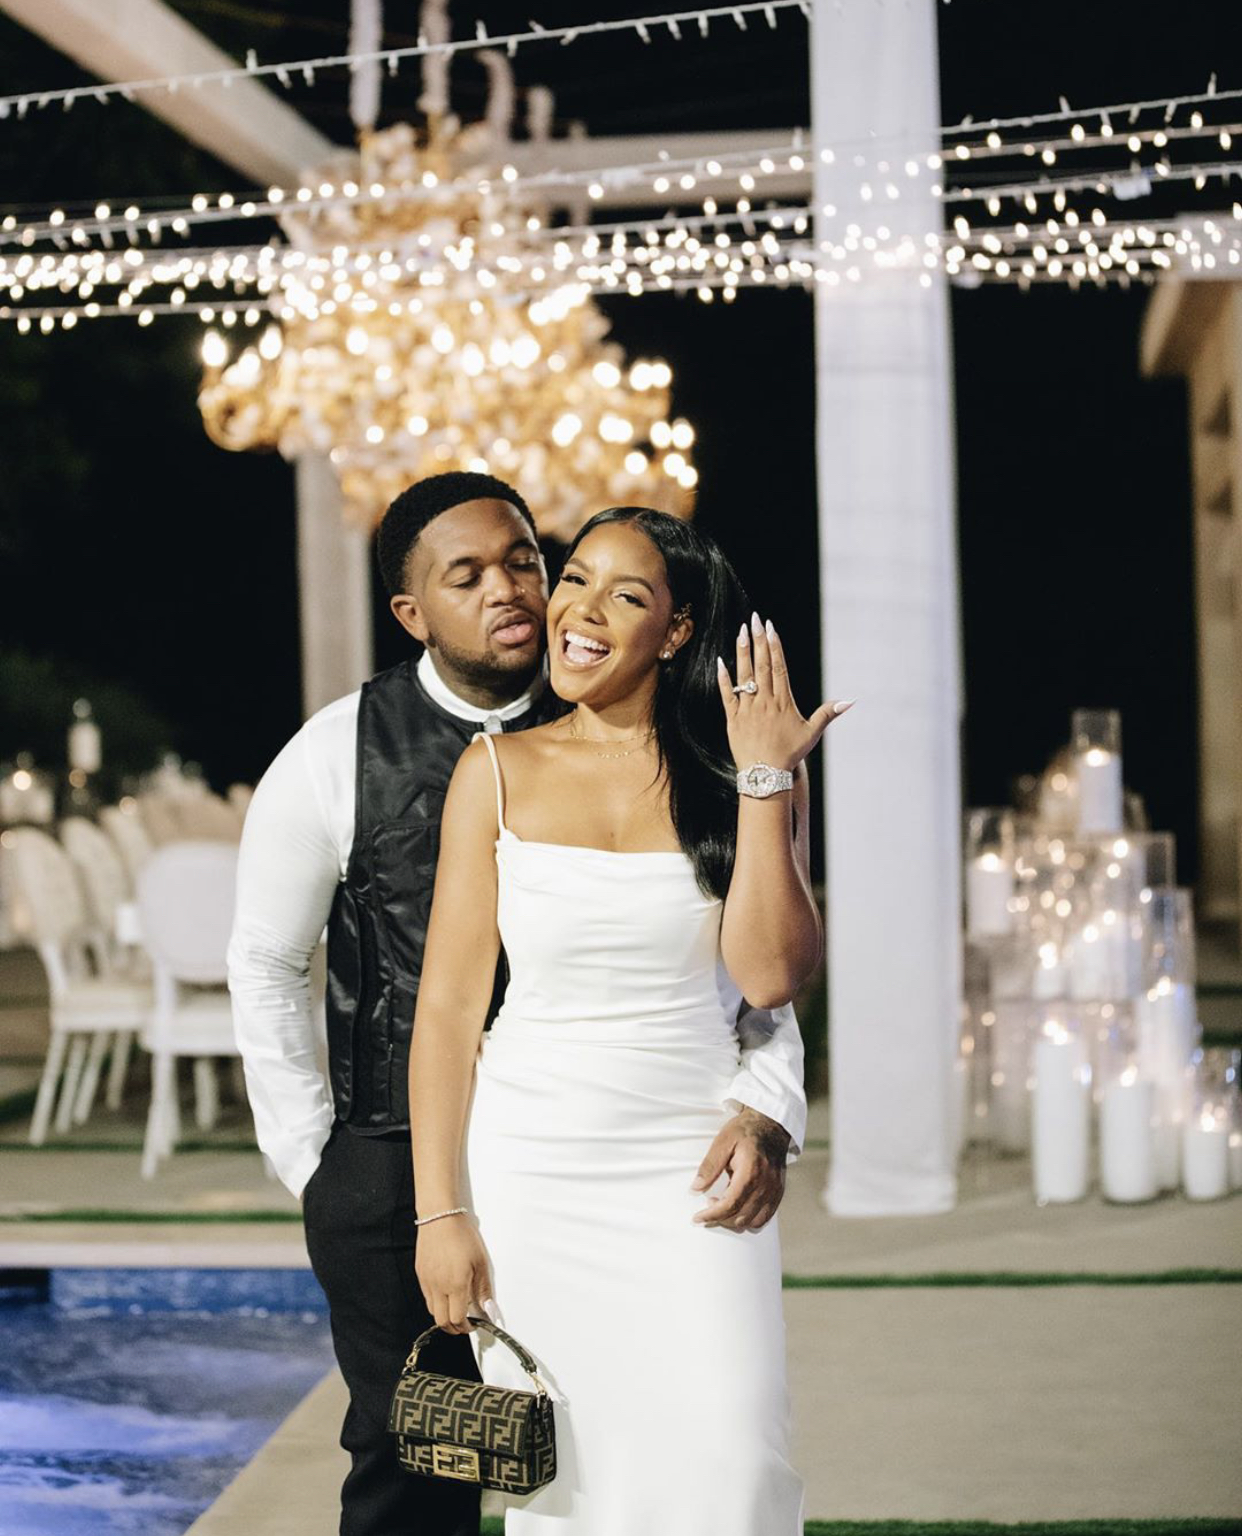 Fashion Bomb Wedding: DJ Mustard and Chanel McFarlene in Ivory House of CB  'Margaux' Dress and Mini Fendi Baguette Bag Tie the Knot With Small Wedding  Dinner! – Fashion Bomb Daily